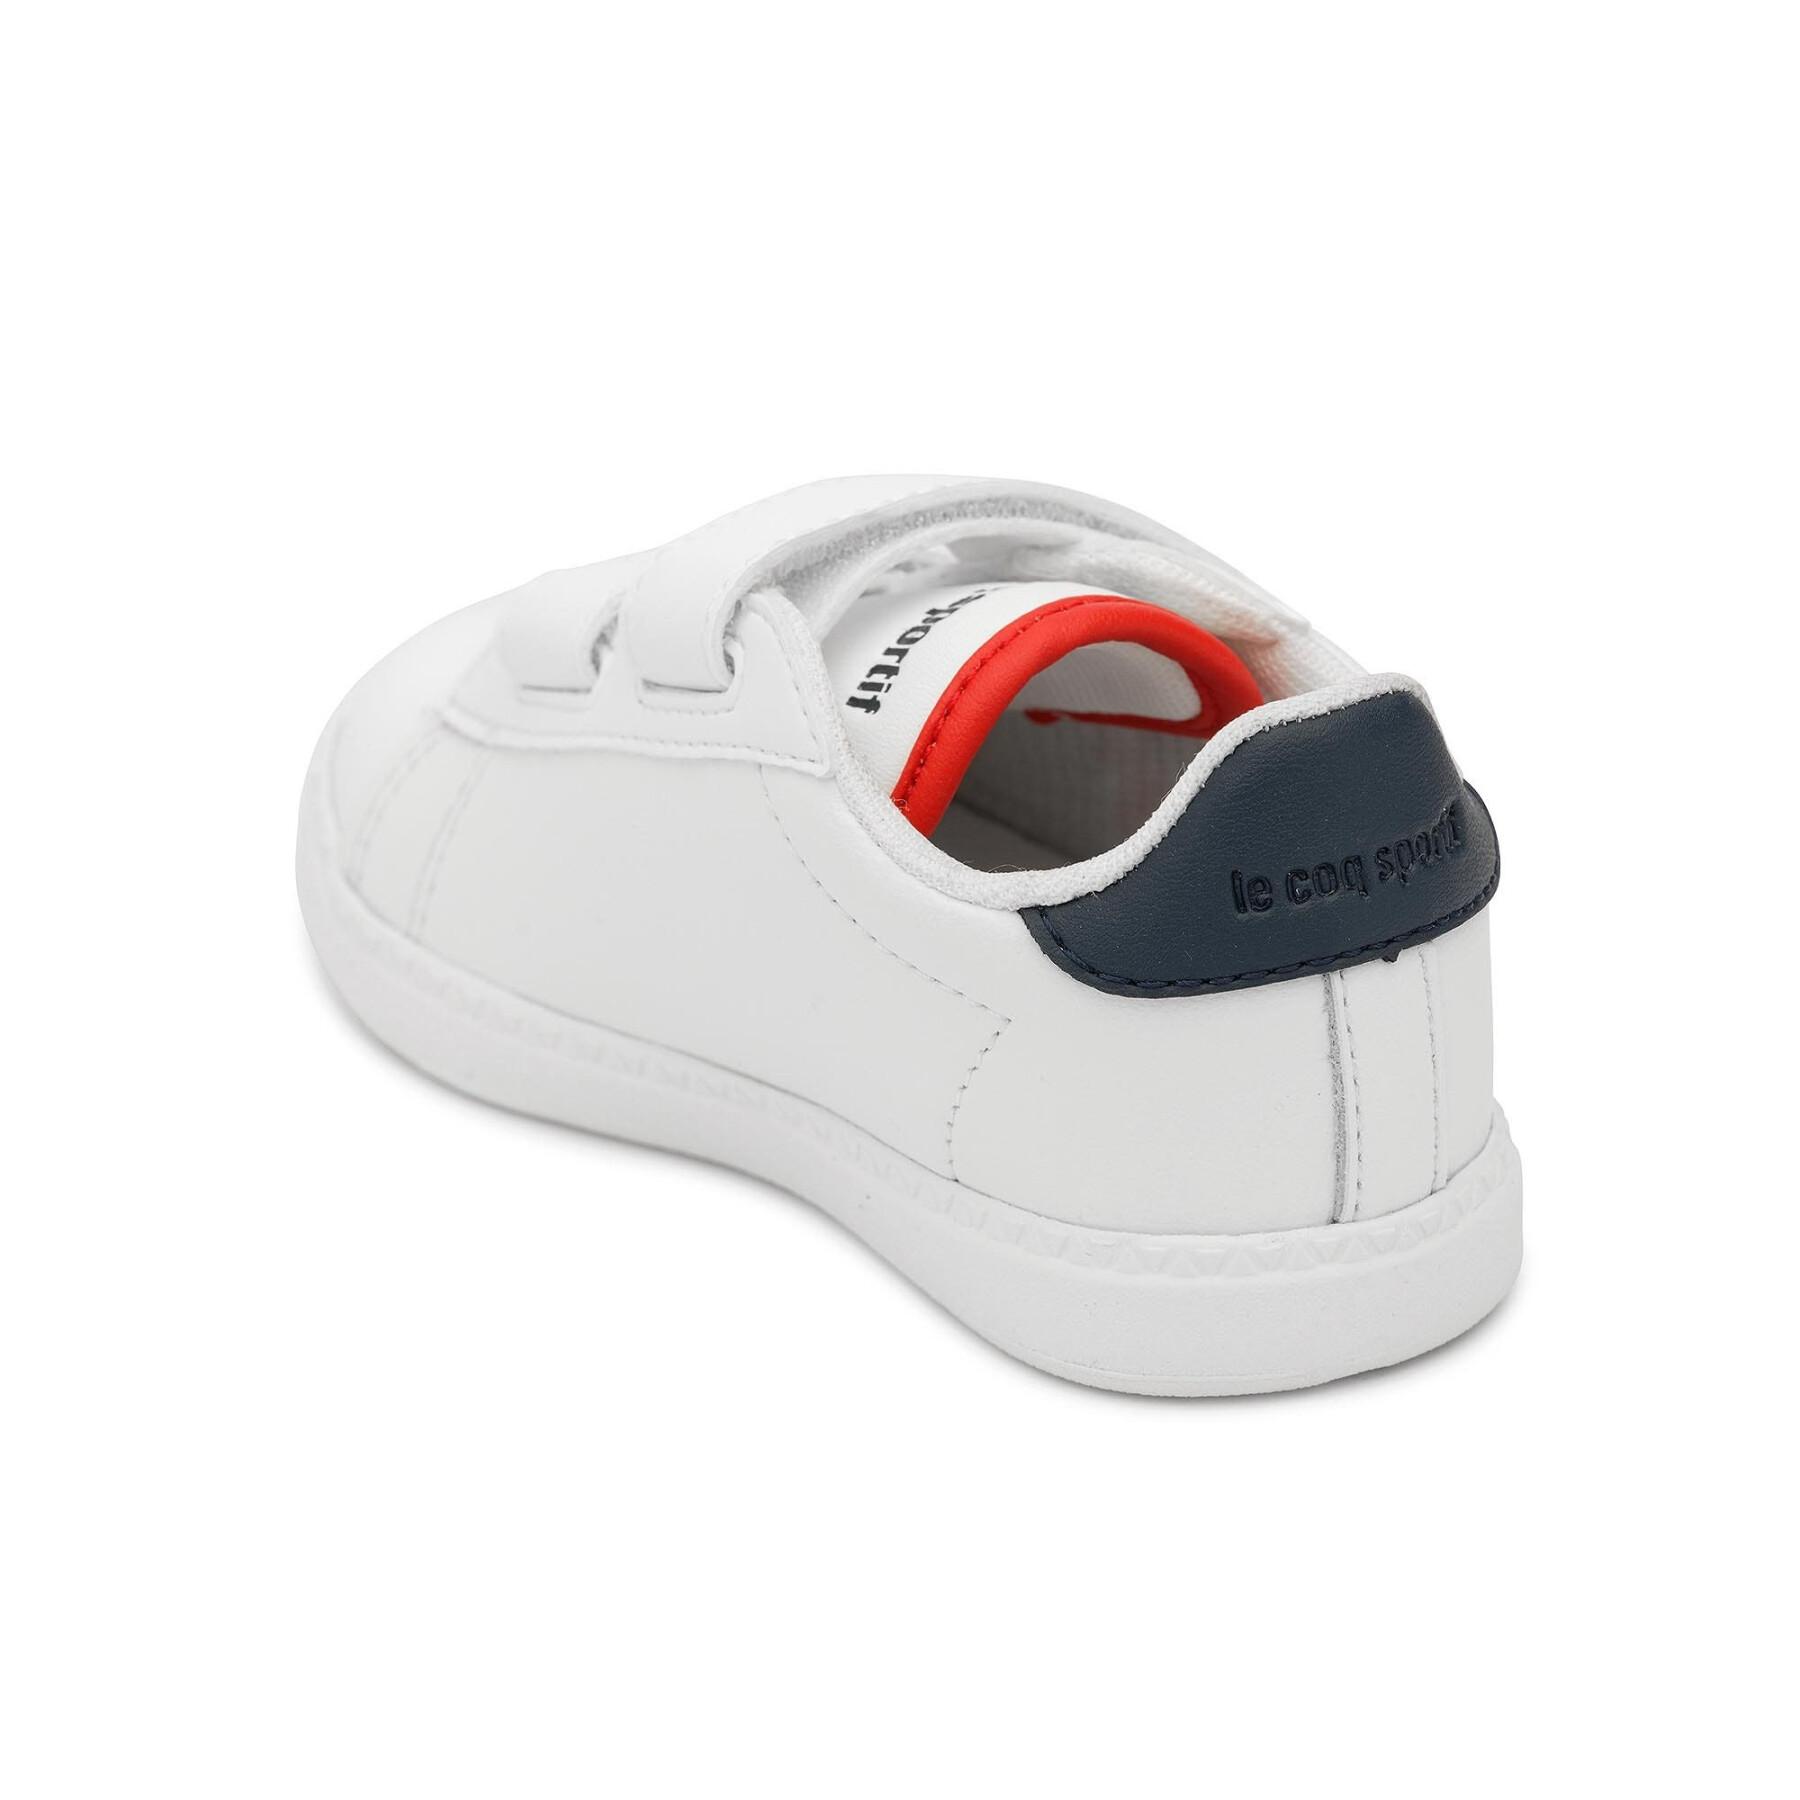 Babytrainers Le Coq Sportif Courtset Inf